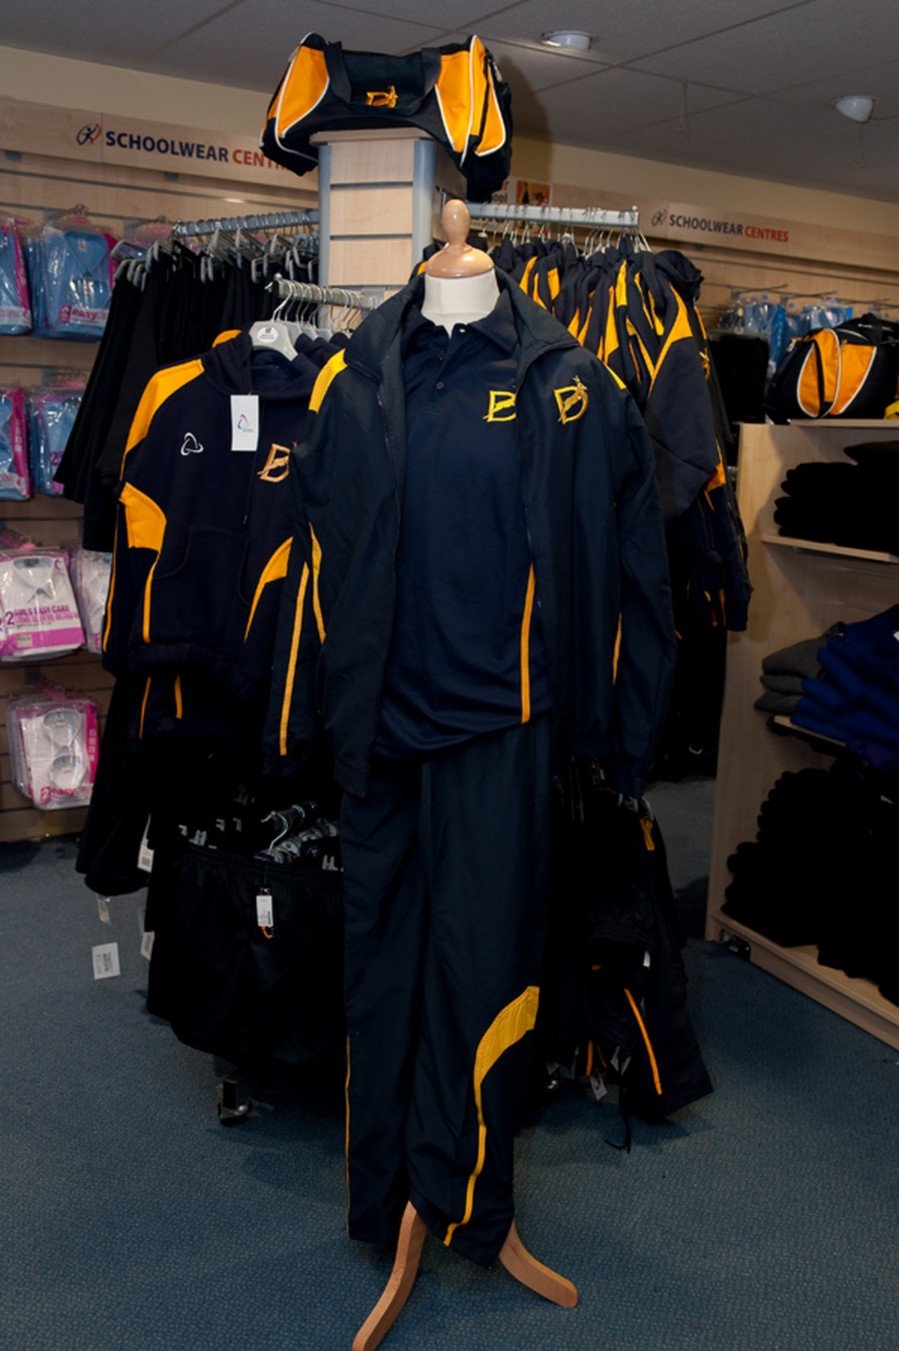 The Deanes Academy - Official Sports Tracksuit Bottom - Schoolwear Centres | School Uniform Centres